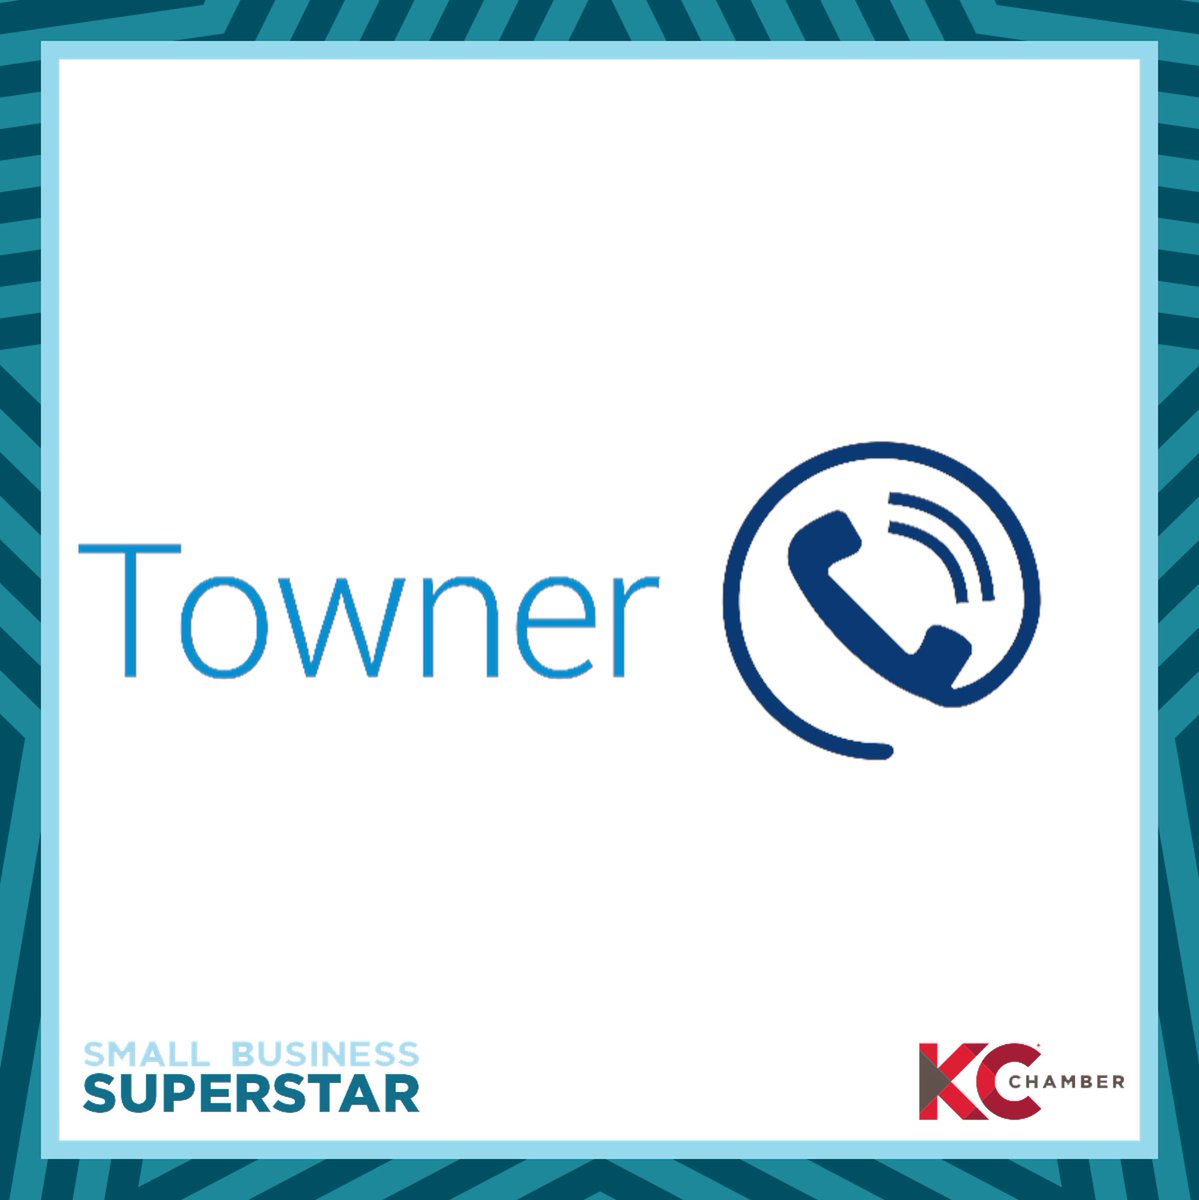 Thanks to all our clients and customers who submitted us as a #SmallBizSuperstar with the @kcchamber. Small businesses keep our local economy moving forward.
#culture #teamwork #community